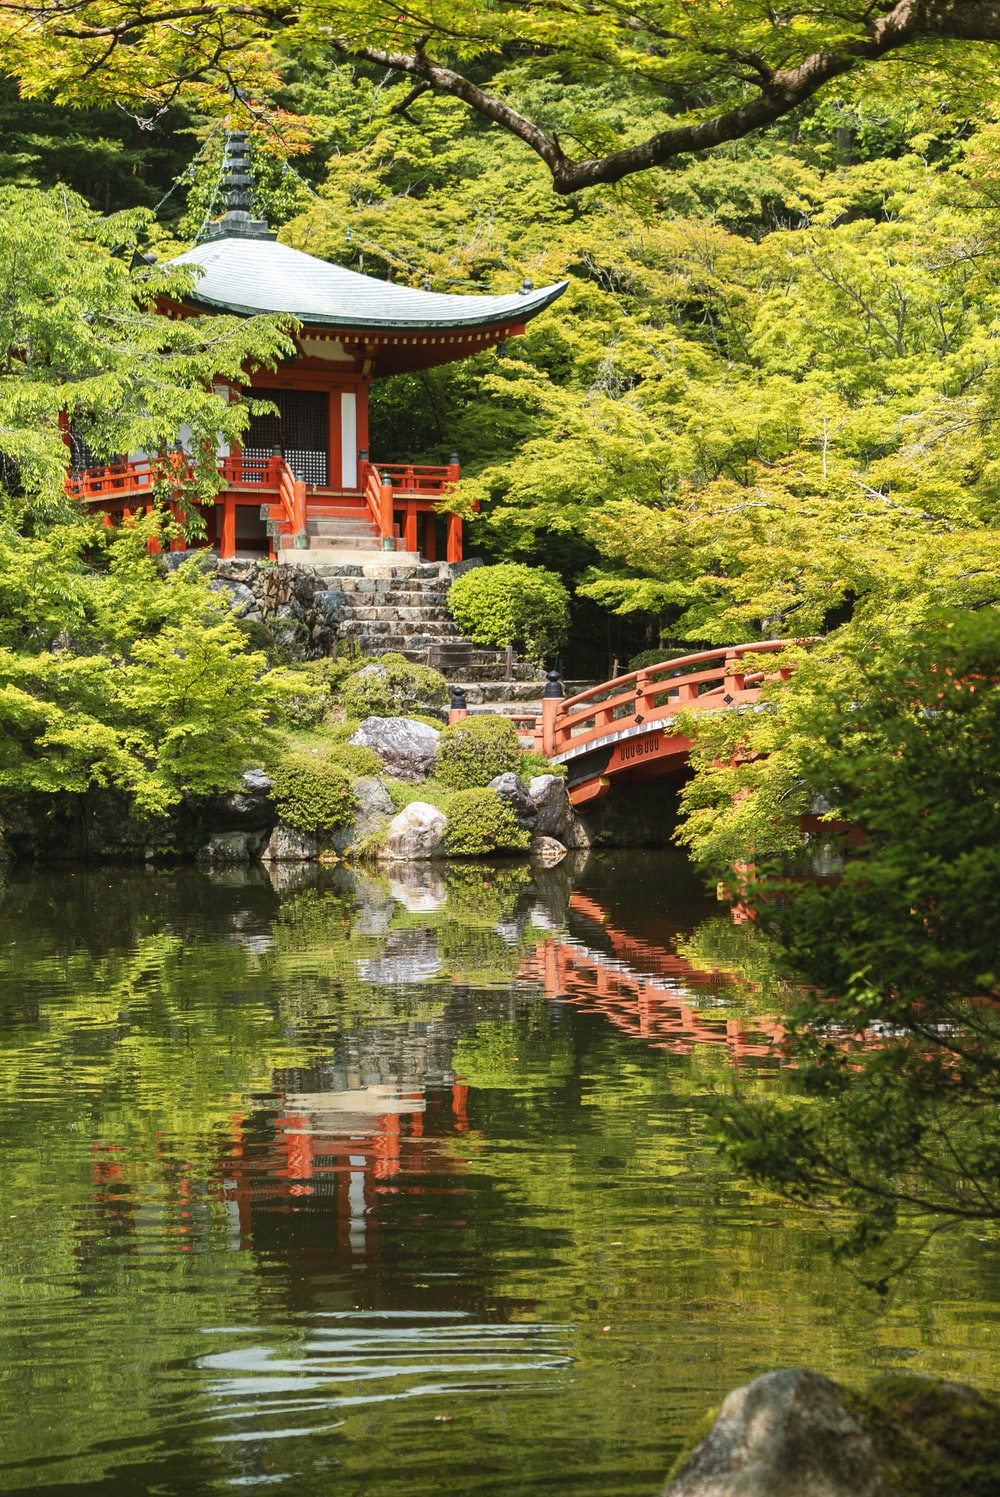 Japan Temple Picture. Download Free Image